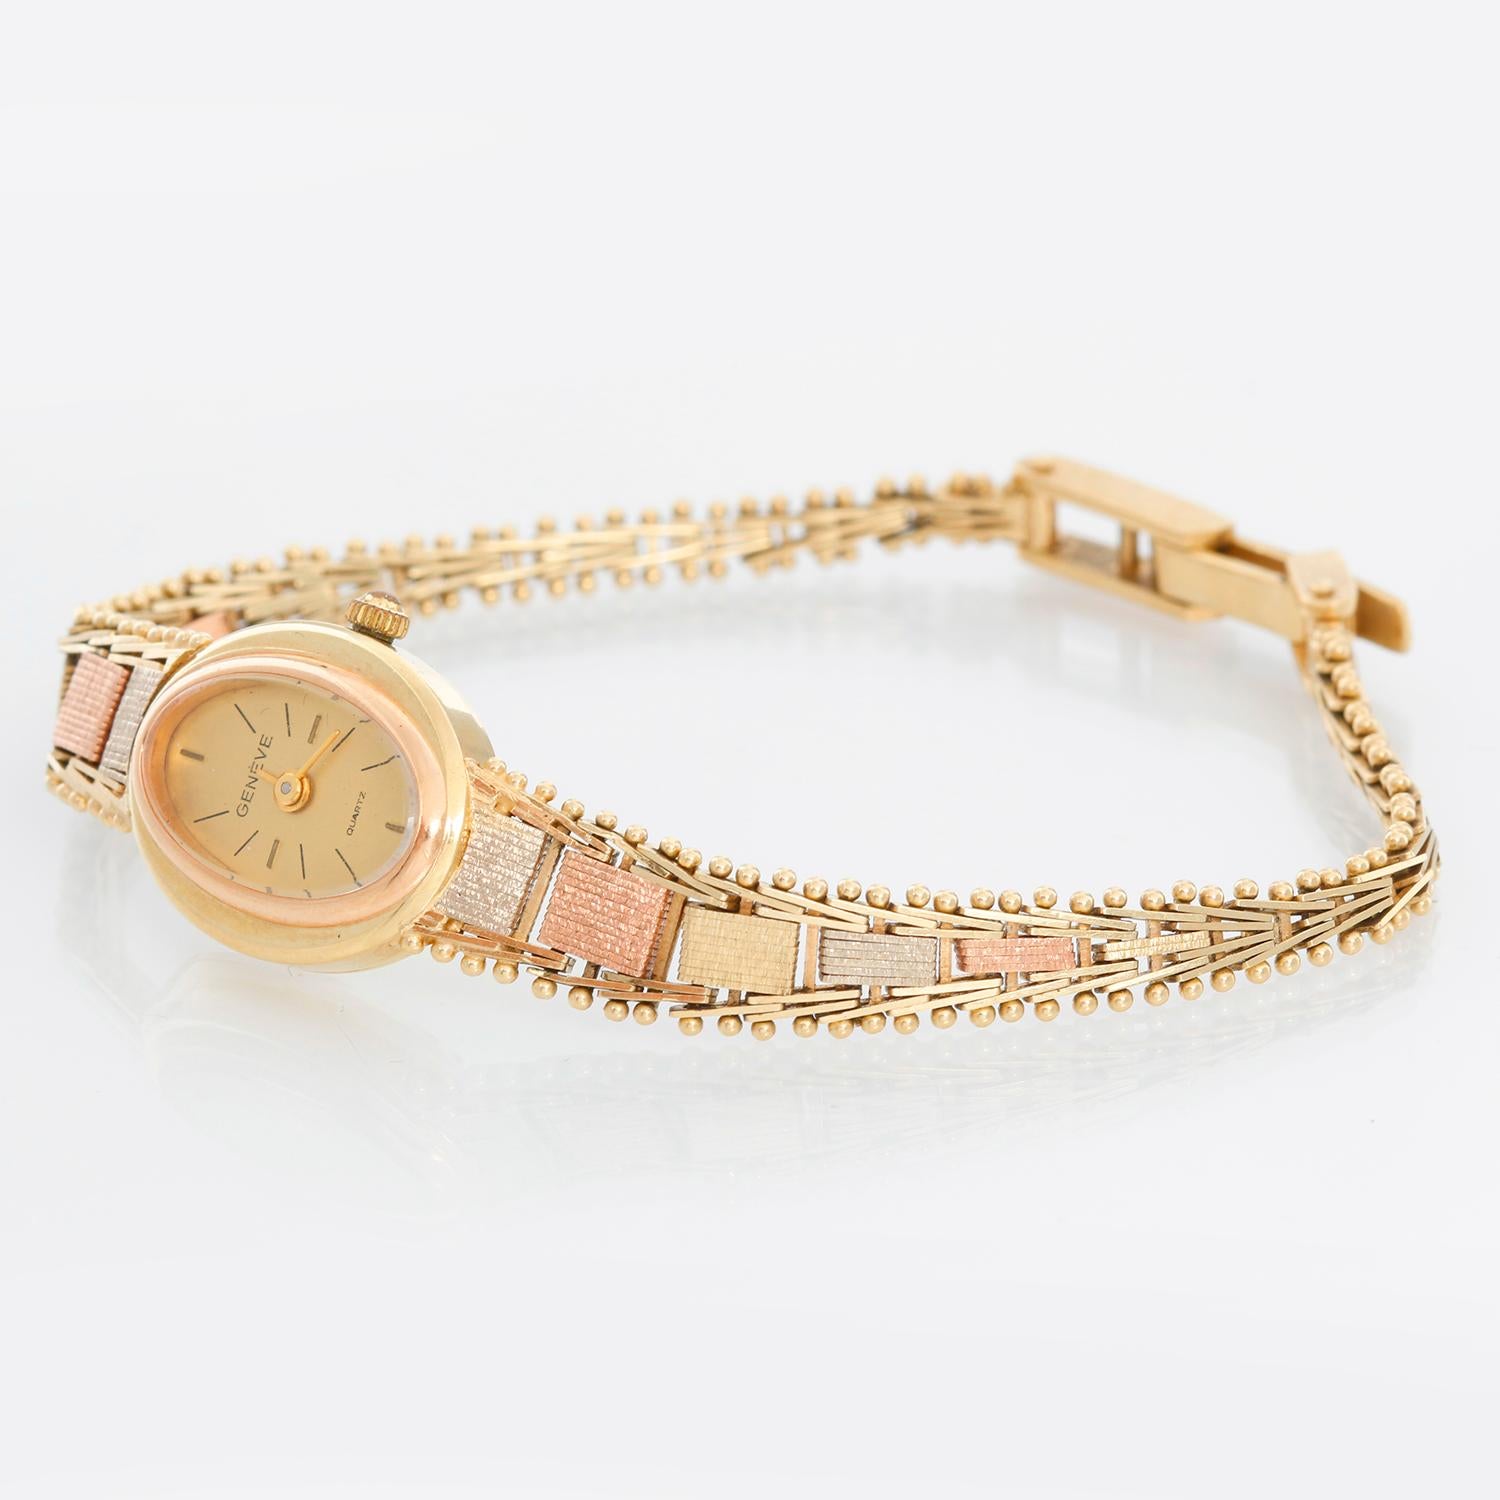 Geneve Ladies 14K Trigold Quartz Watch  - Quartz . 14K Yellow gold ( 16 mm ) . Champagne dial with stick hour markers . Rose gold, yellow gold and white gold bracelet ; will fit into a 7 inch wrist . Pre-owned with custom box .